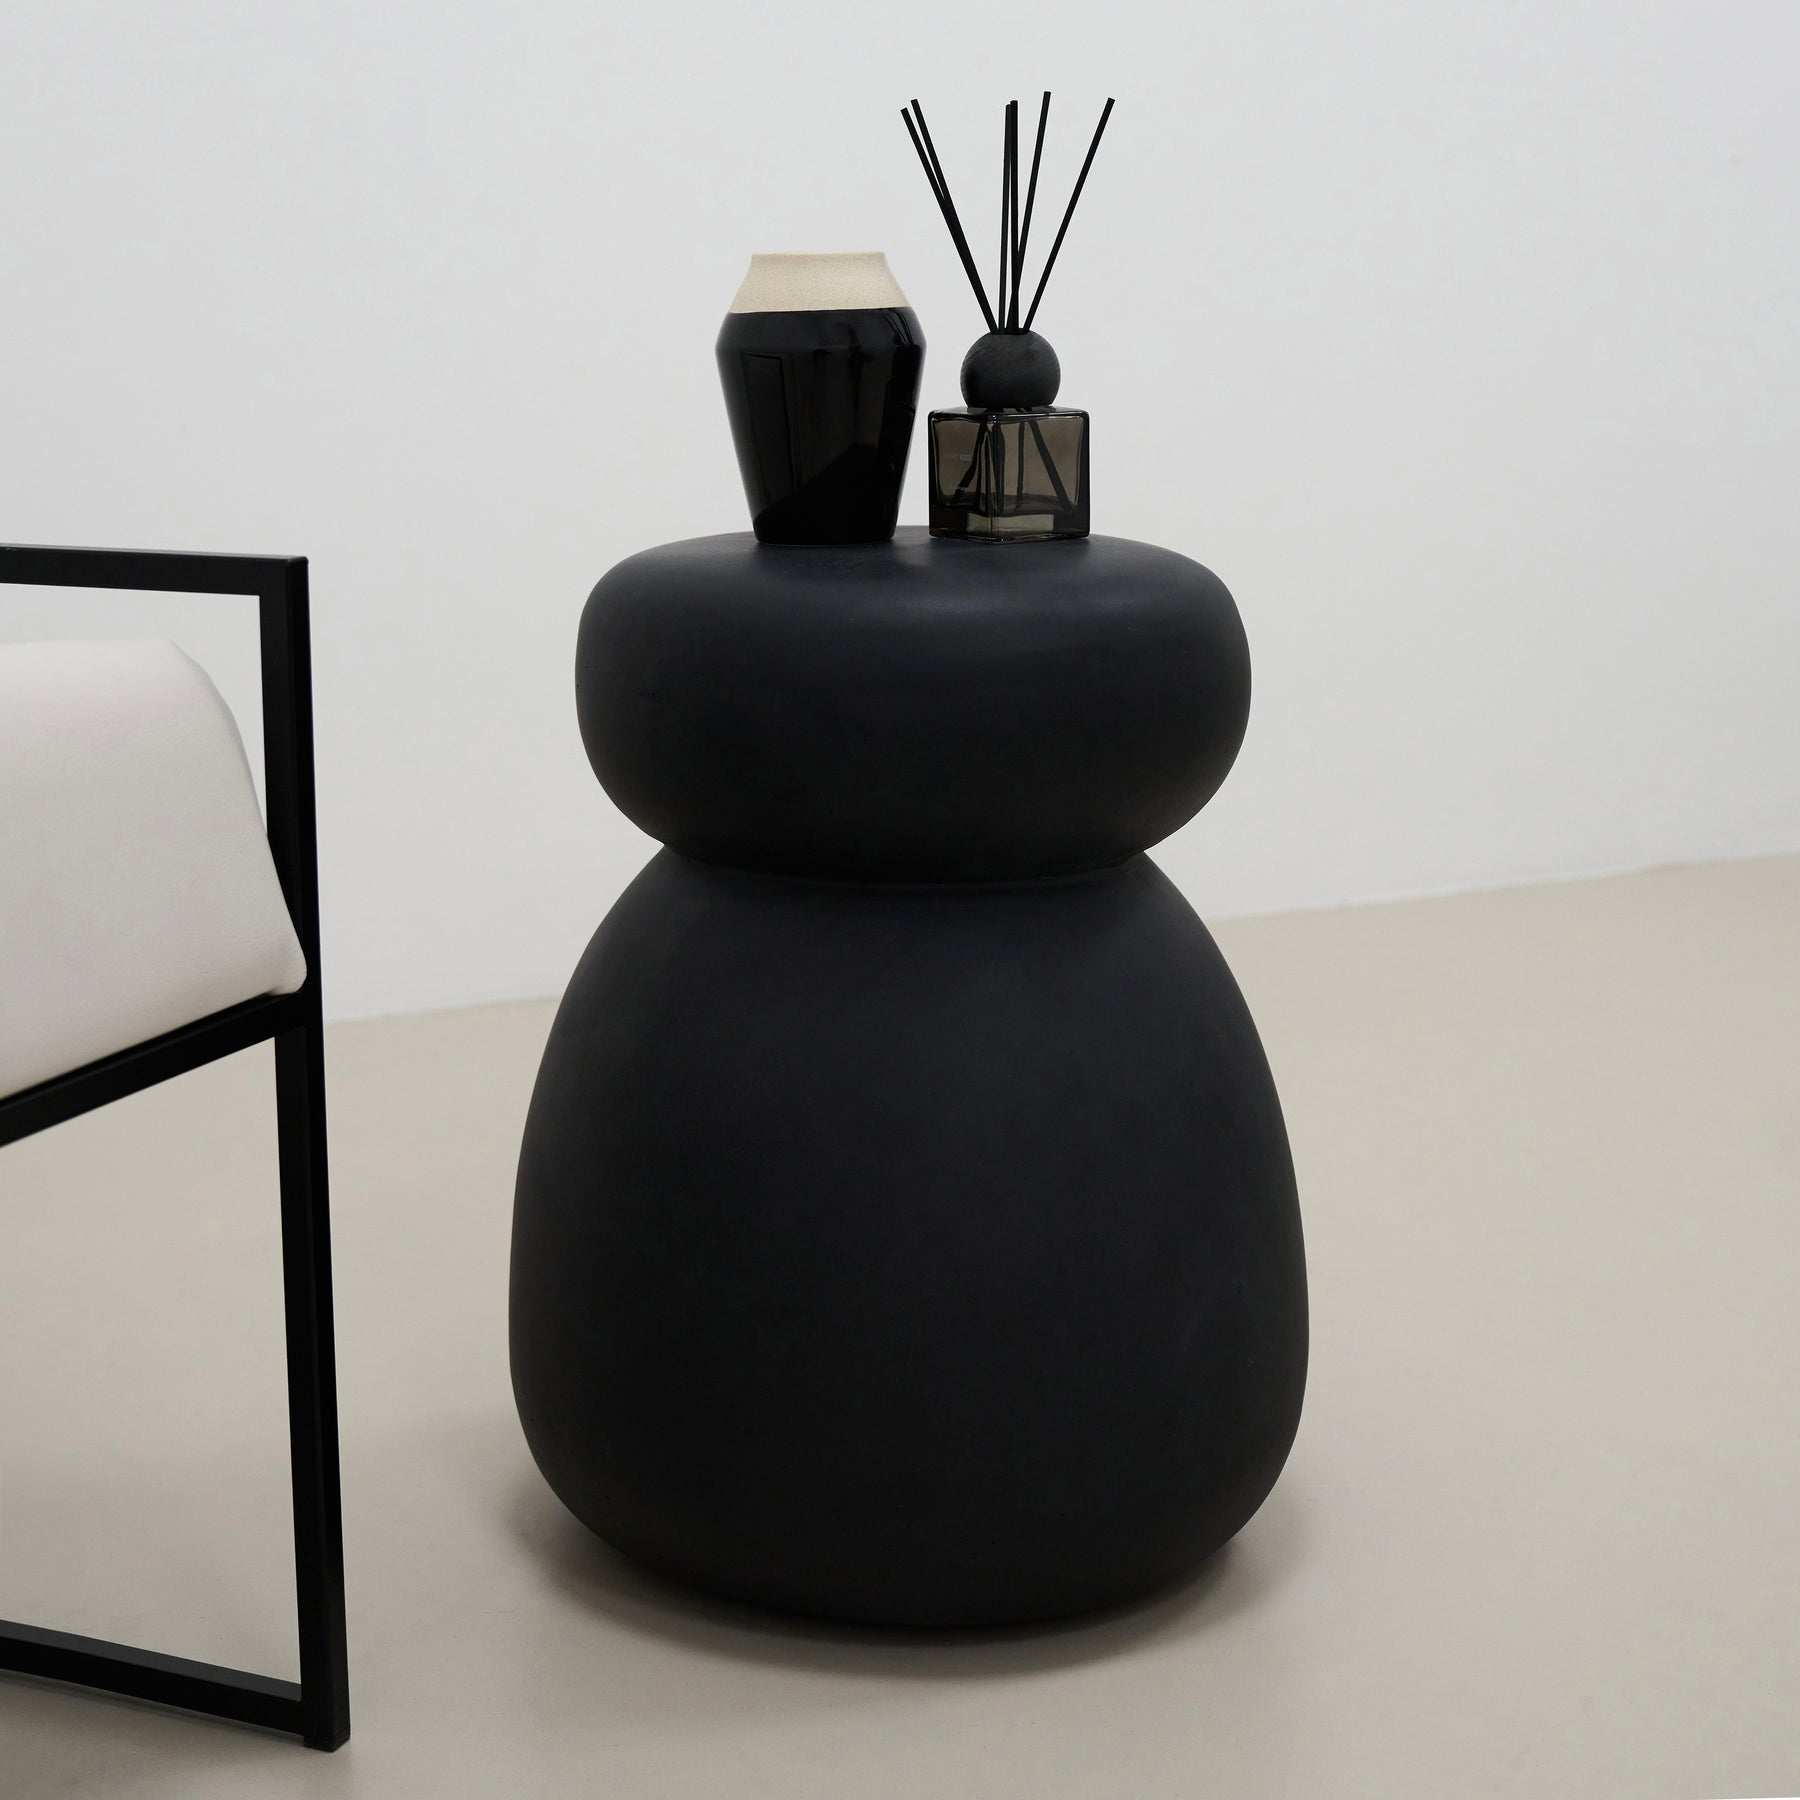 Minimal Onyx Side Table decorated with ceramics and incense